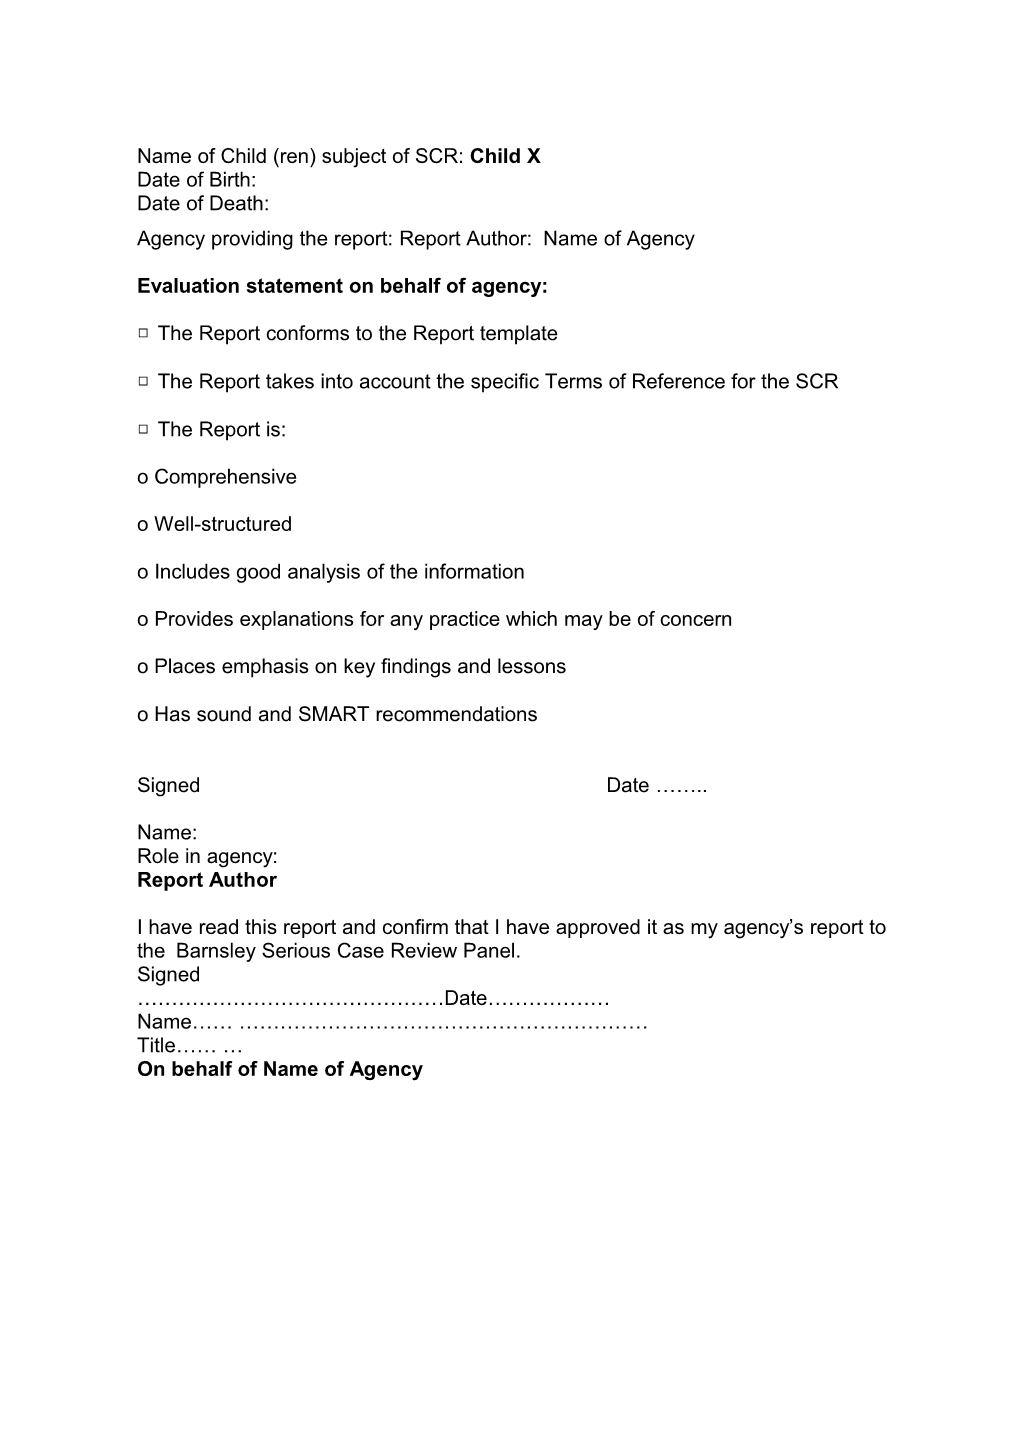 Agencyreportforthe Serious Case Review on Child X